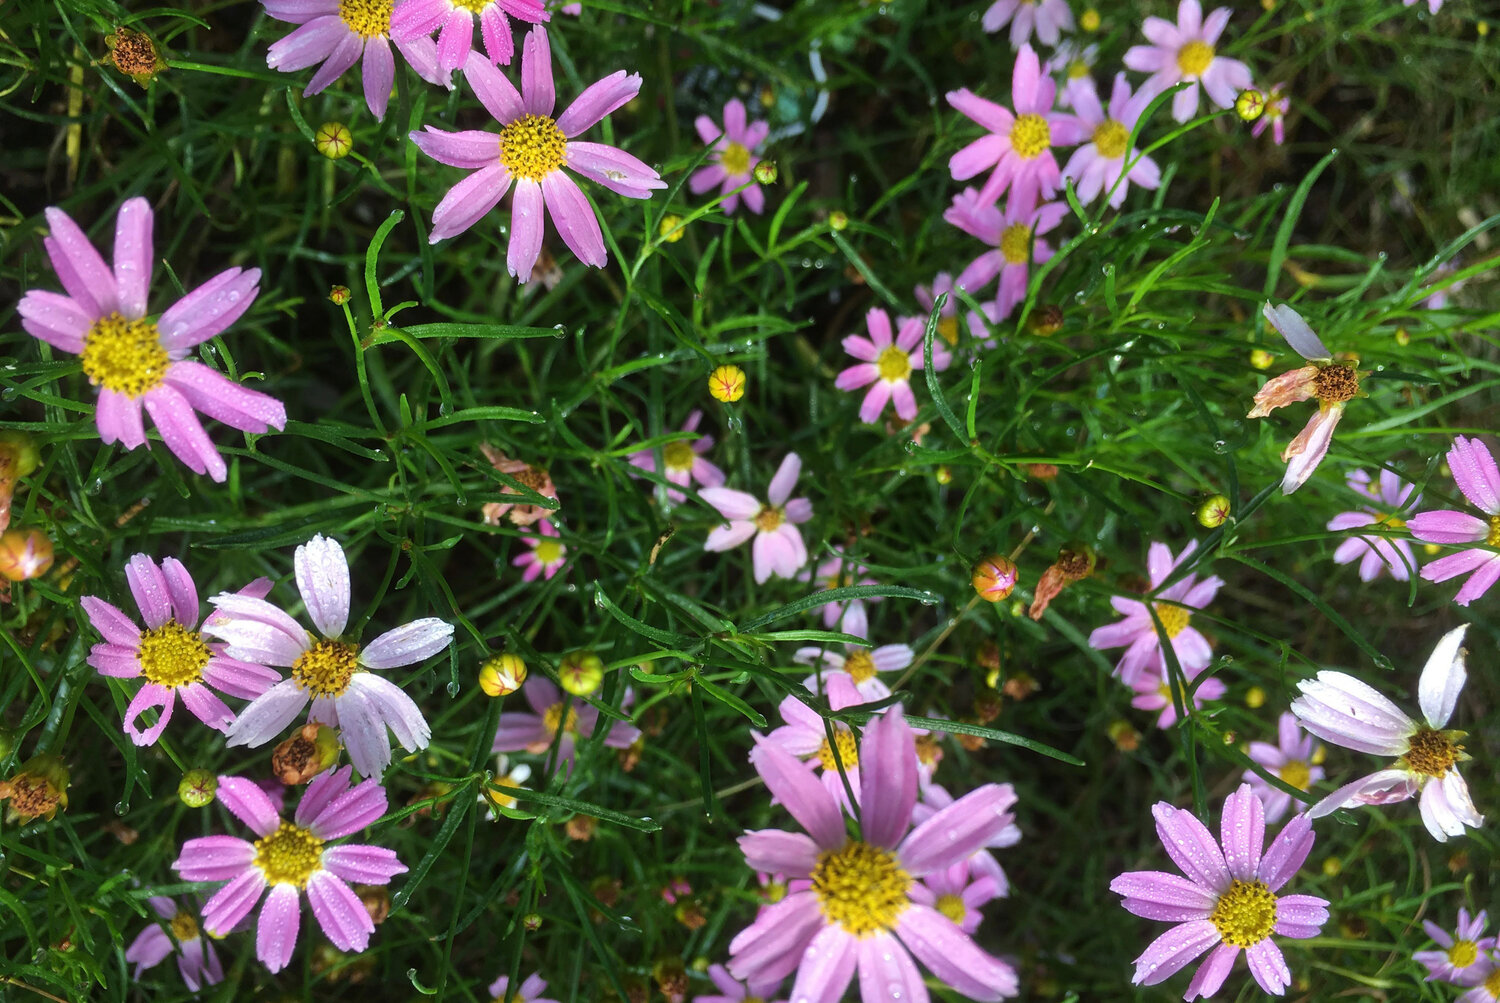 Pink Tickseed is a native flower growing in Sally Johnson’s garden